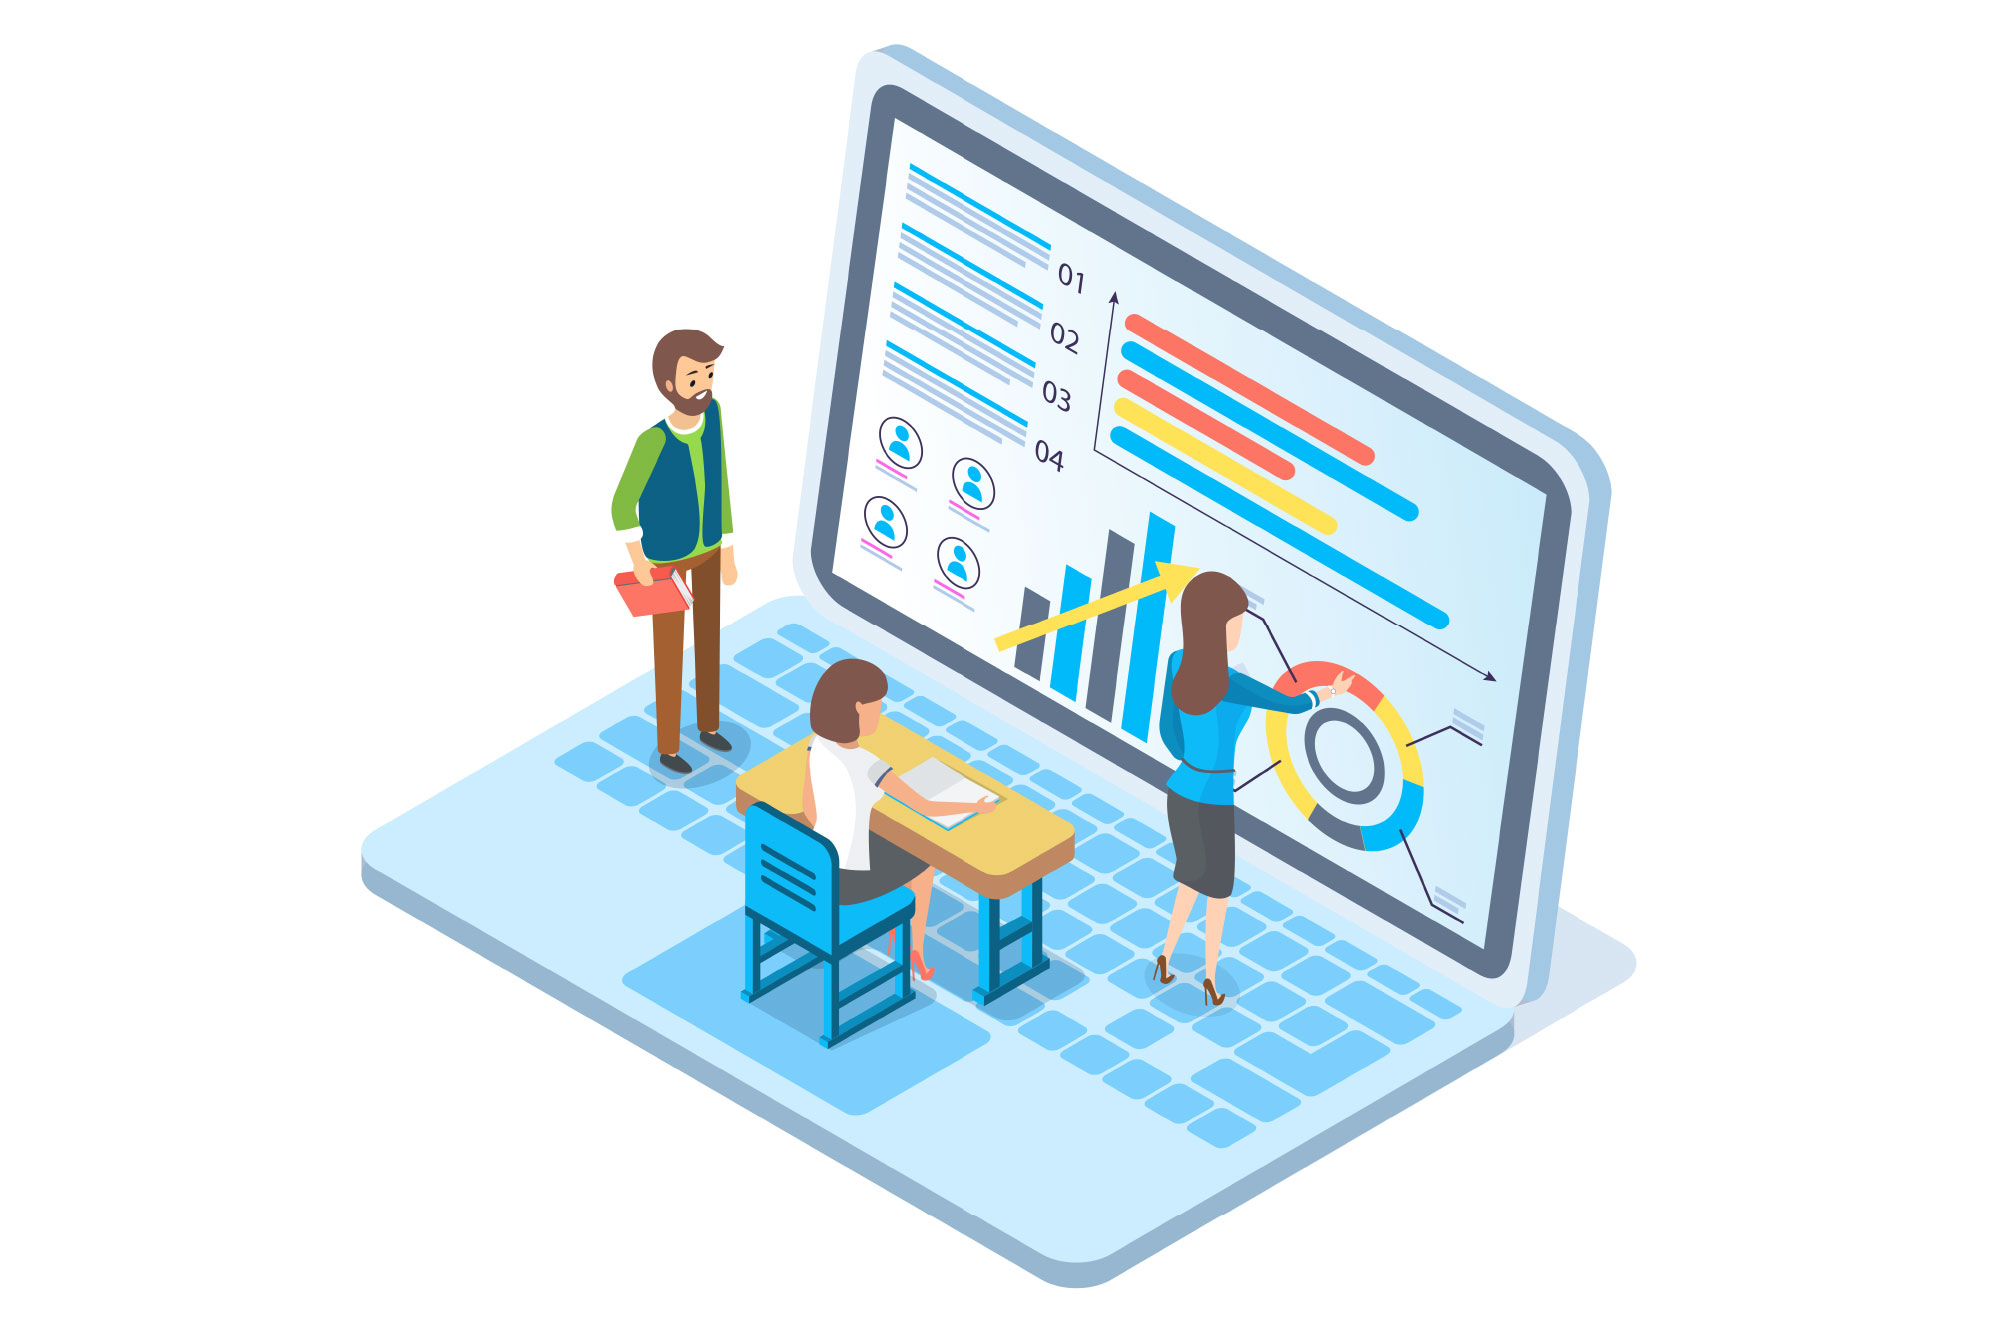 Expert worker evaluate statistics looking and discussing about business infographic on screen. Concepts for business analysis and planning consulting team work. Financial research with data indicators